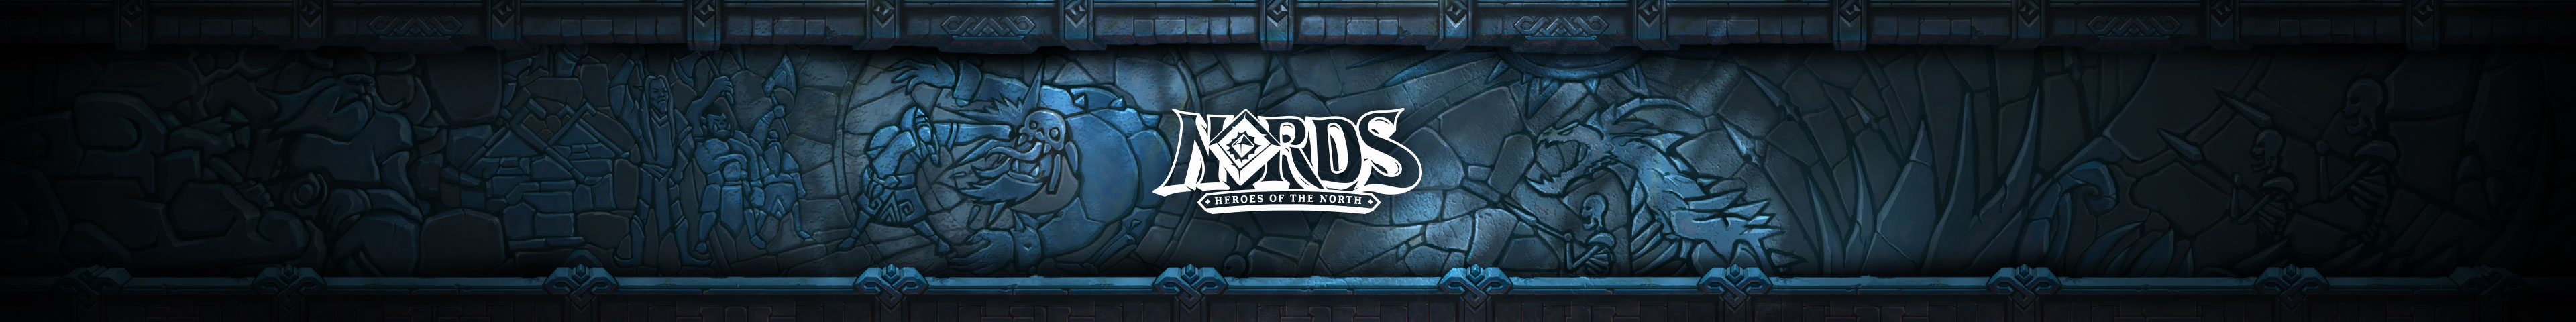 Nords: Heroes of the North Forum